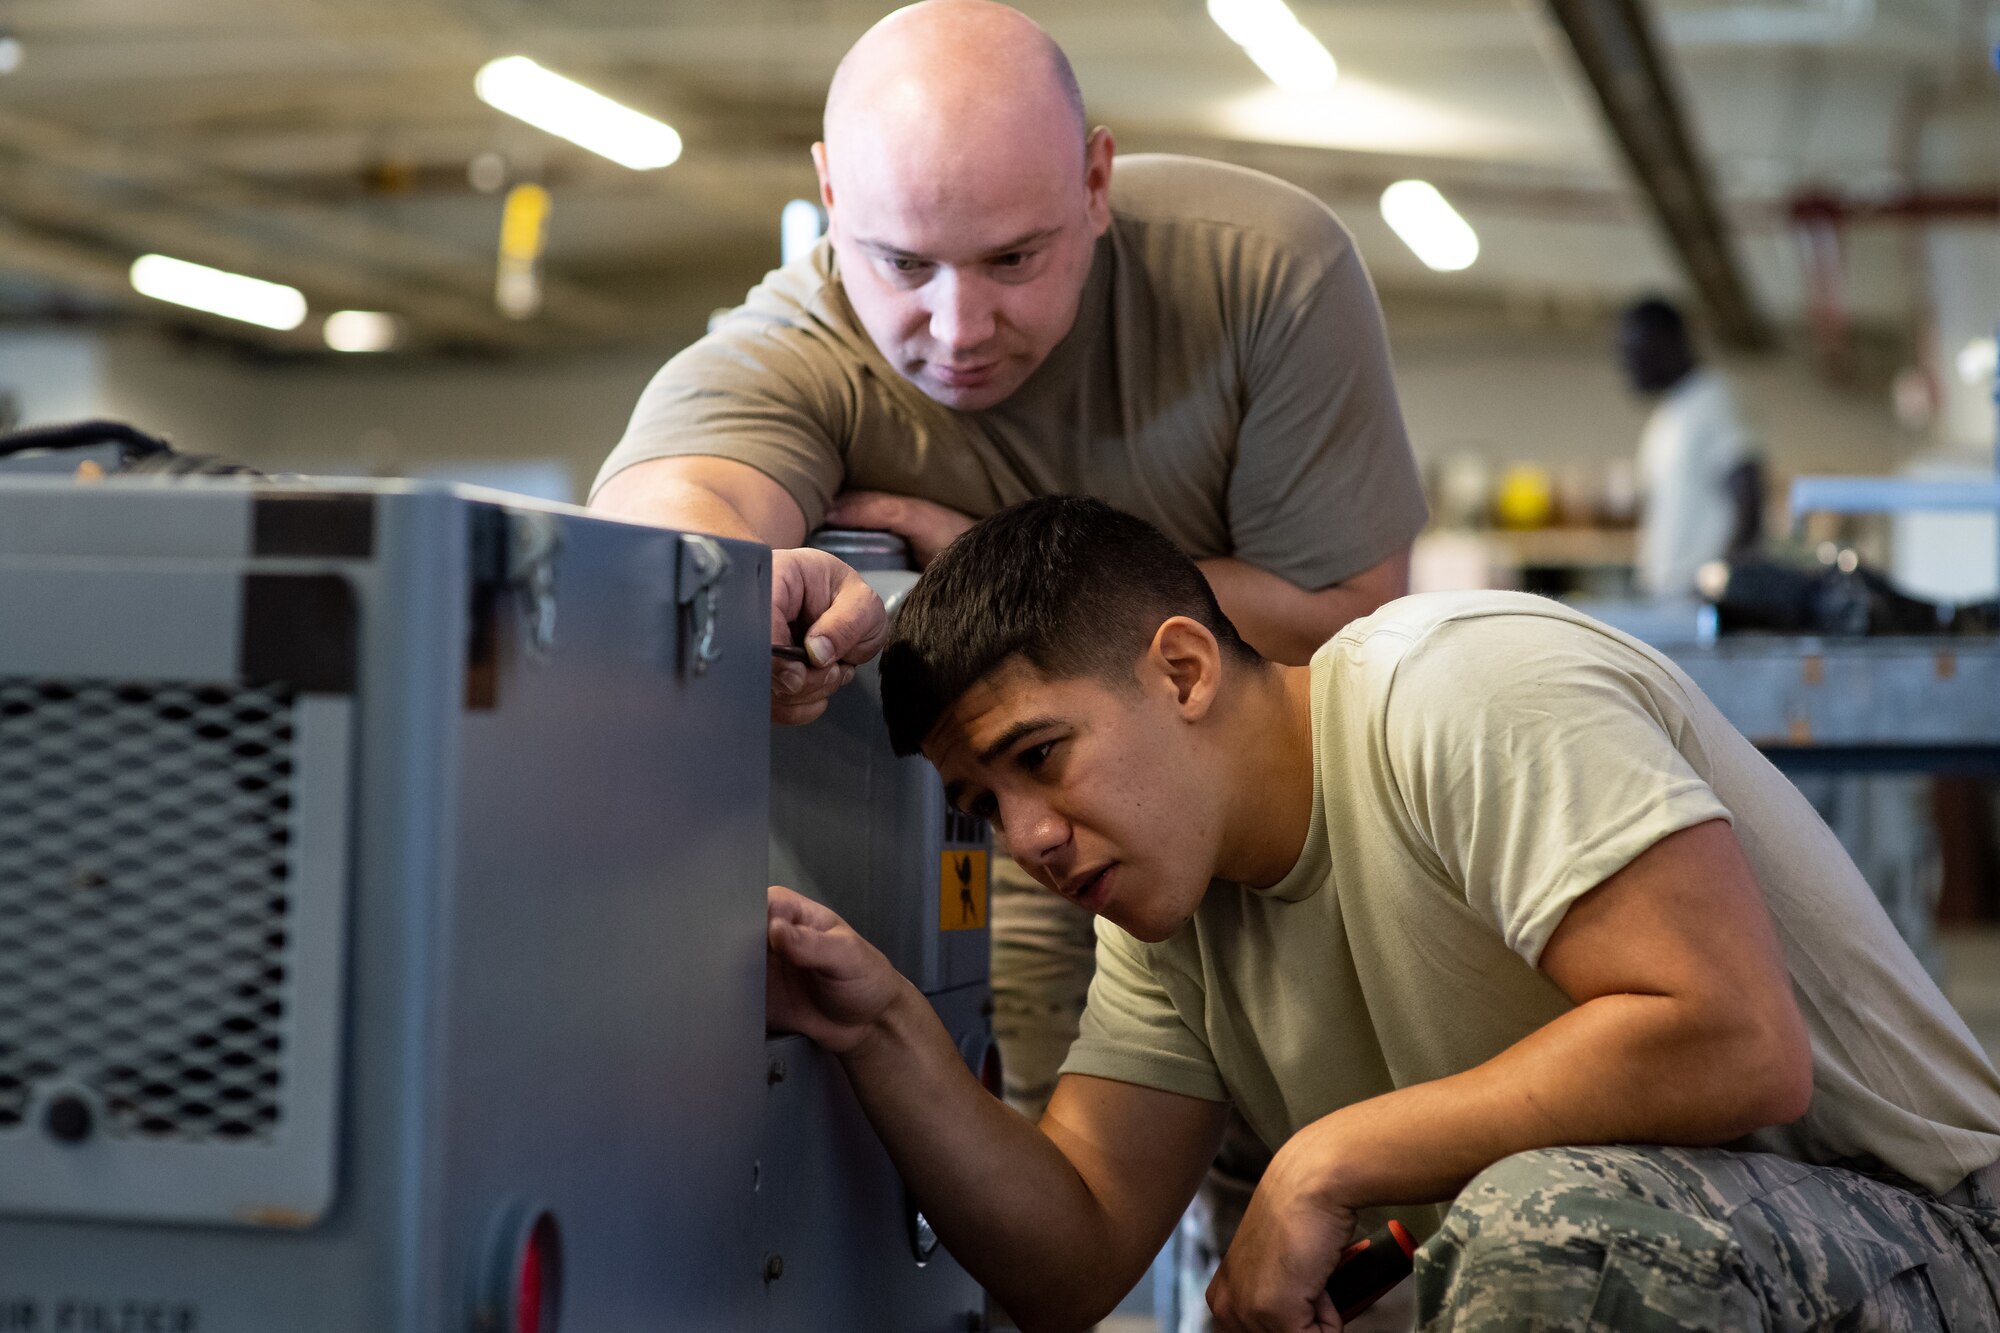 Tech. Sgt. Boris Raykhel, left, and Airman 1st Class Javier Saldana, 388th Aerospace Ground Equipment Flight, work on a munitions loader during maintenance at Hill Air Force Base, Utah, Oct. 4, 2019. Unit Airmen maintain over 600 pieces of equipment that support the mission of crew chiefs, avionics, weapons and ammo troops. (U.S. Air Force photo by R. Nial Bradshaw)